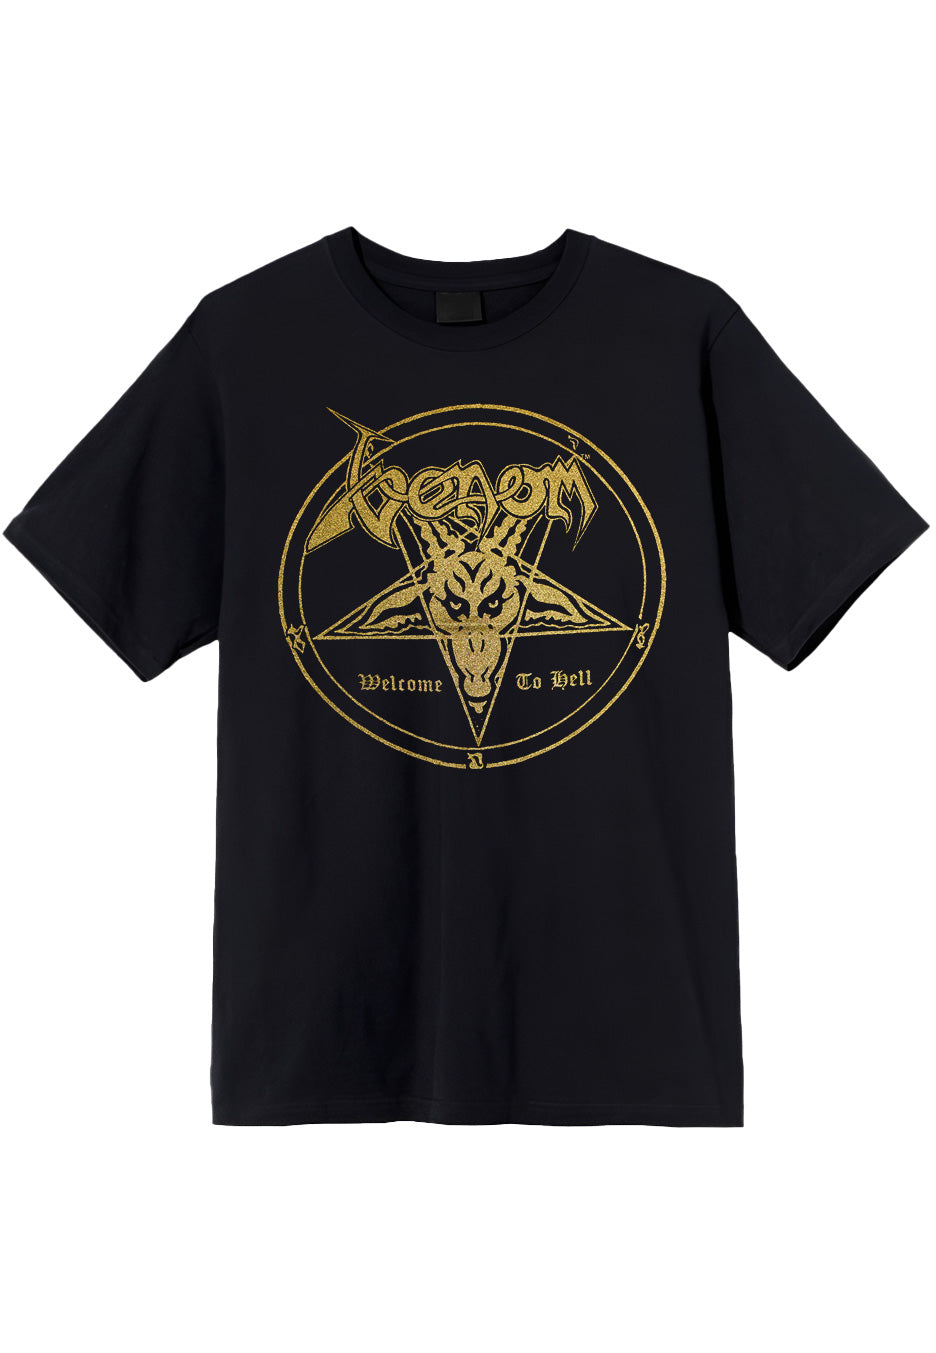 Venom - Welcome To Hell - T-Shirt